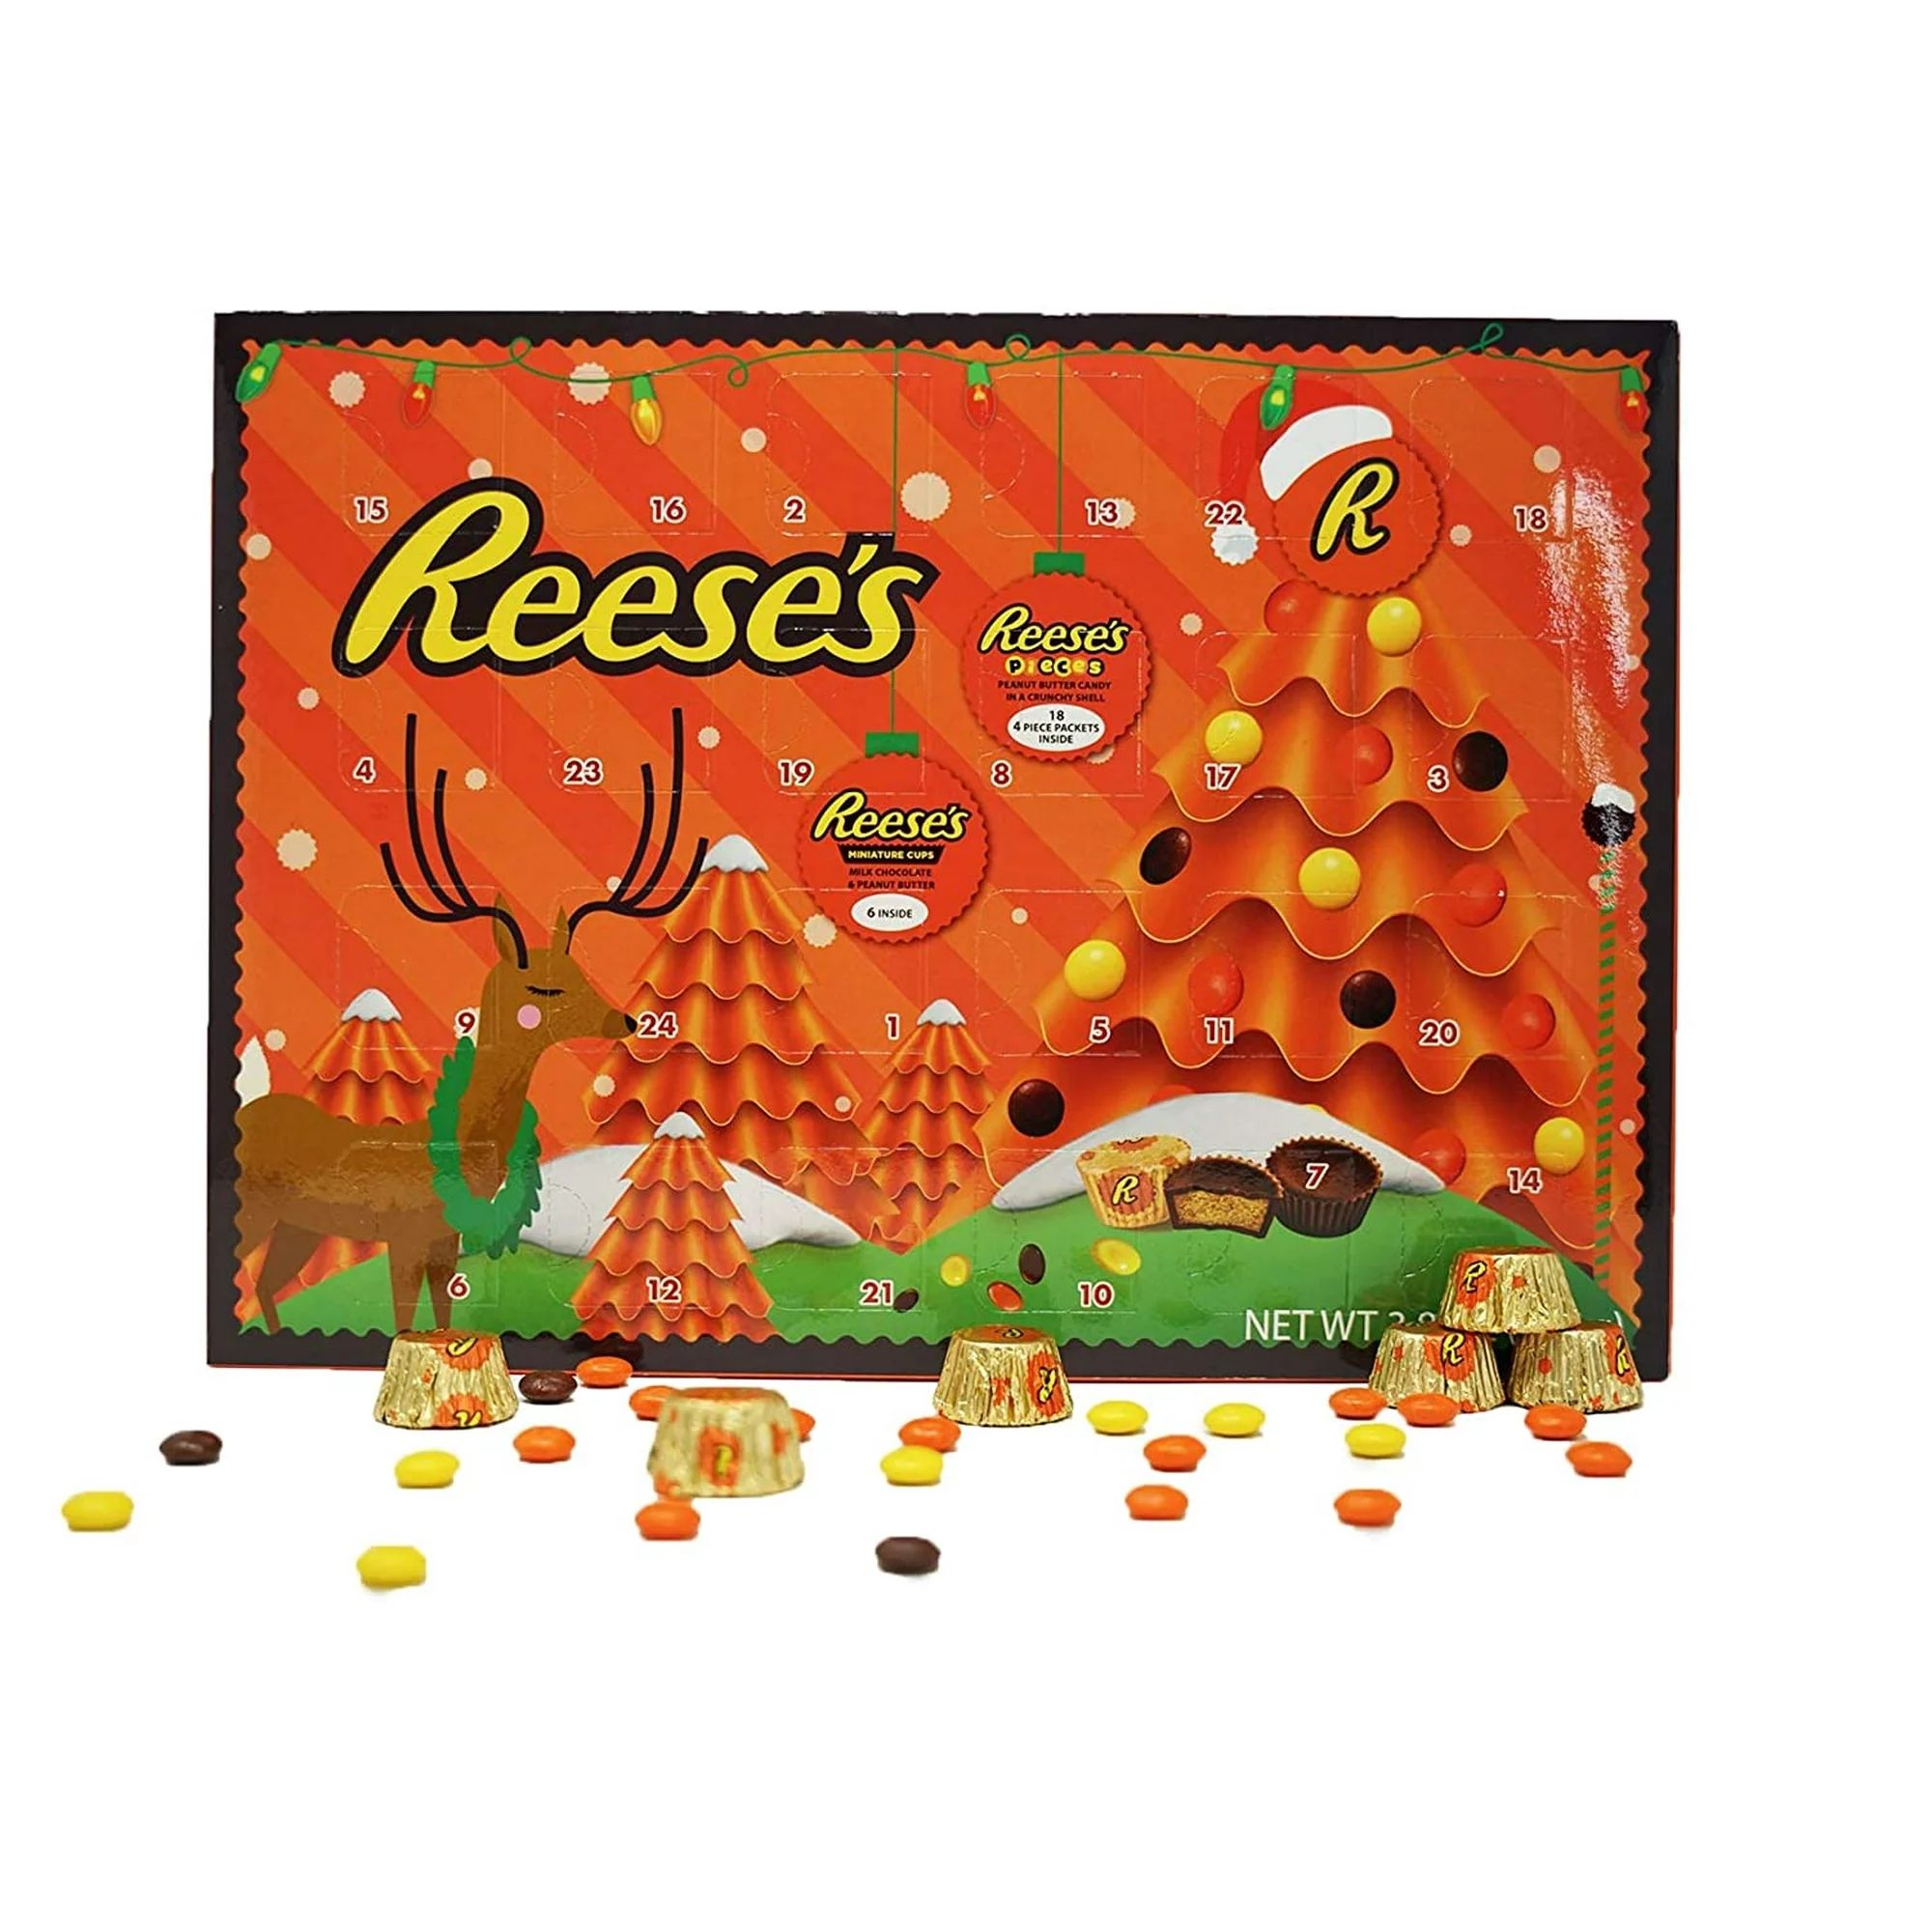 2022 Reese's Holiday Countdown Advent Calendar with Reese's Peanut Butter Cups and Candy Pieces, ... | Walmart (US)